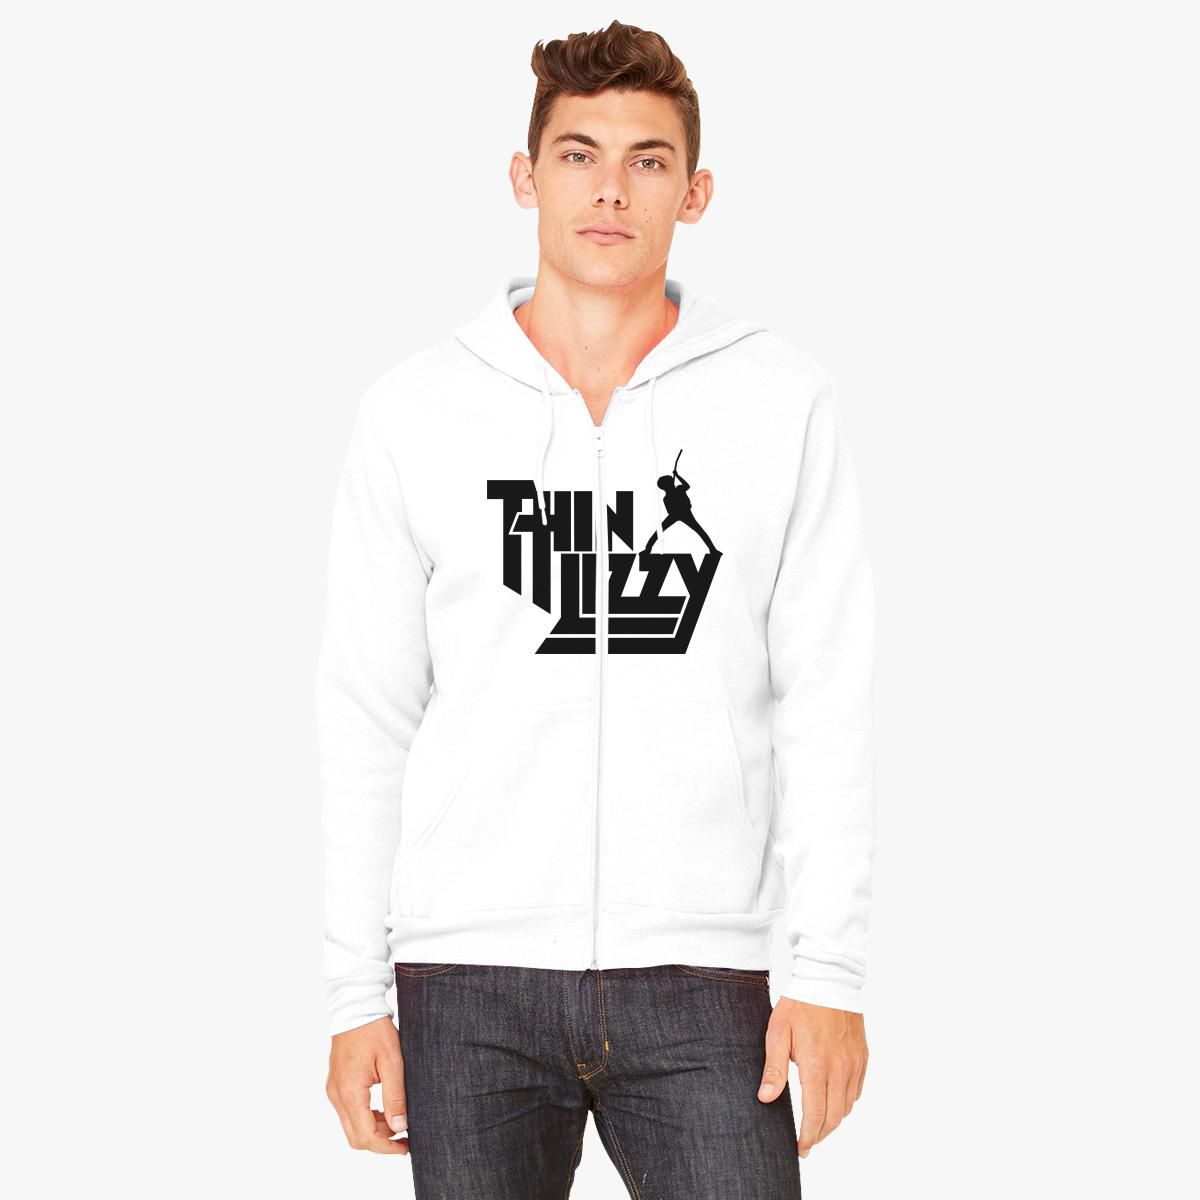 thin lizzy hoodie